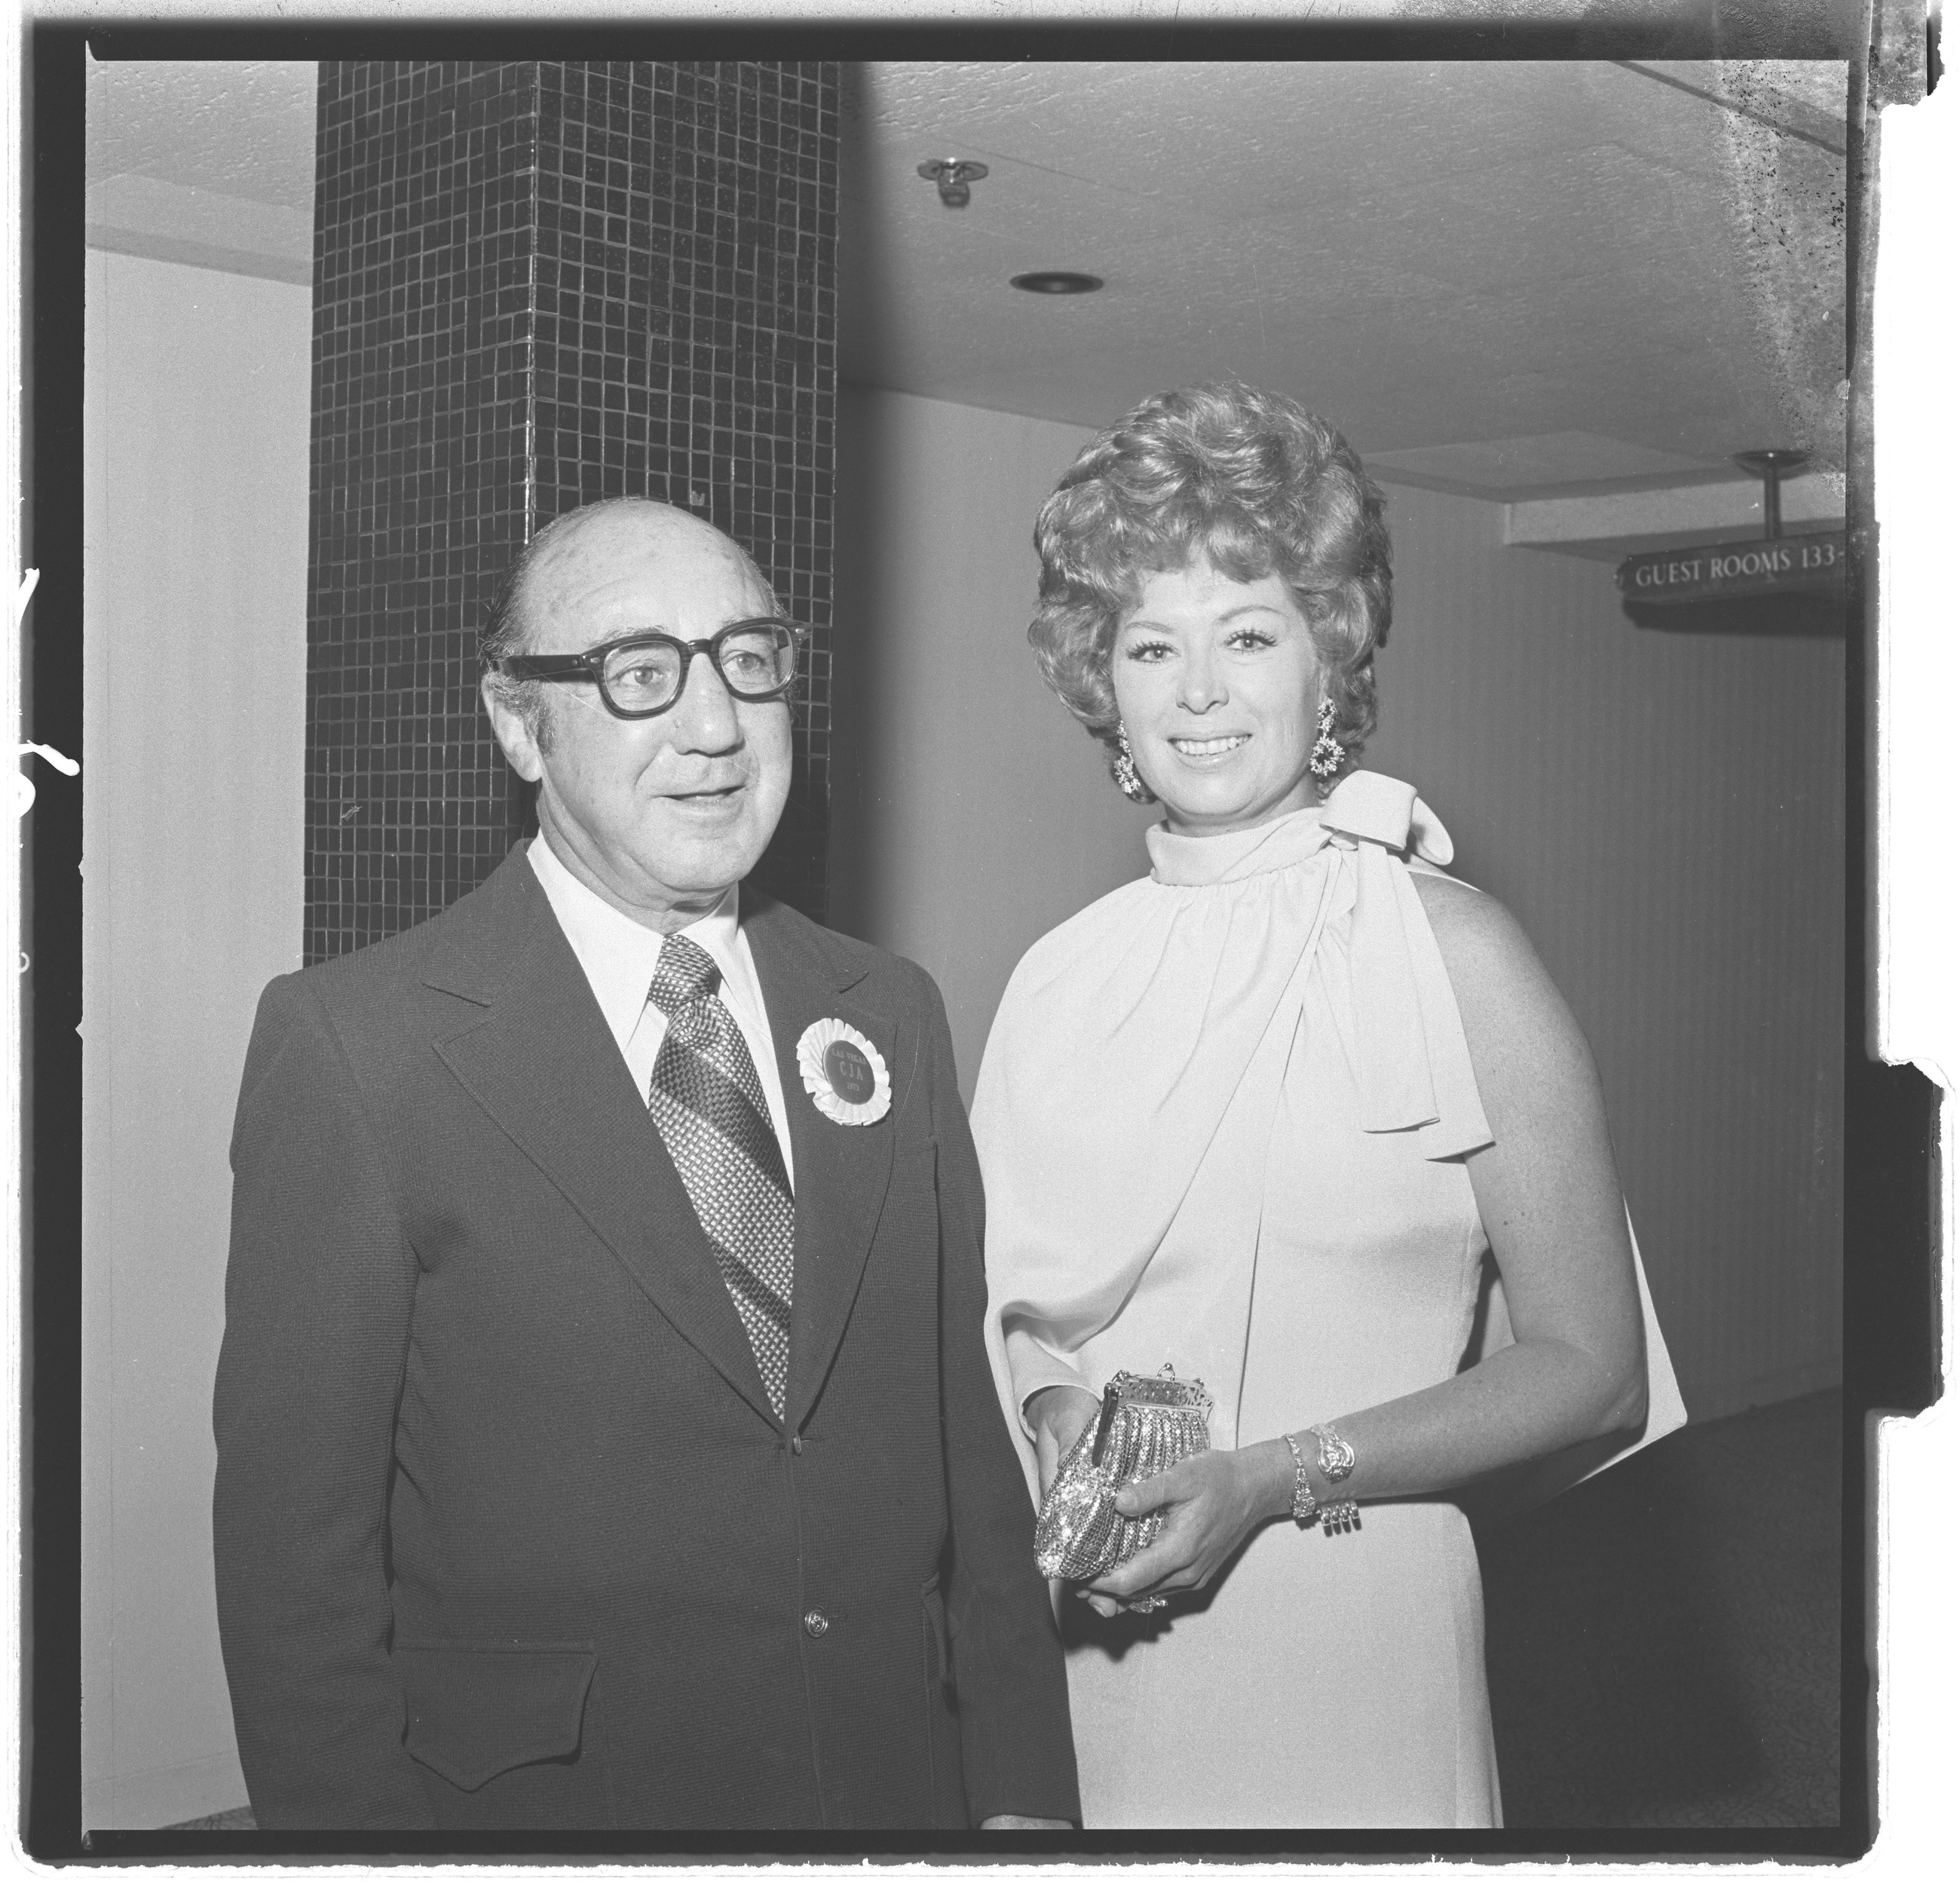 Photographs of Combined Jewish Appeal (Cocktail Party at Caesars Palace, Red Skelton), image 27